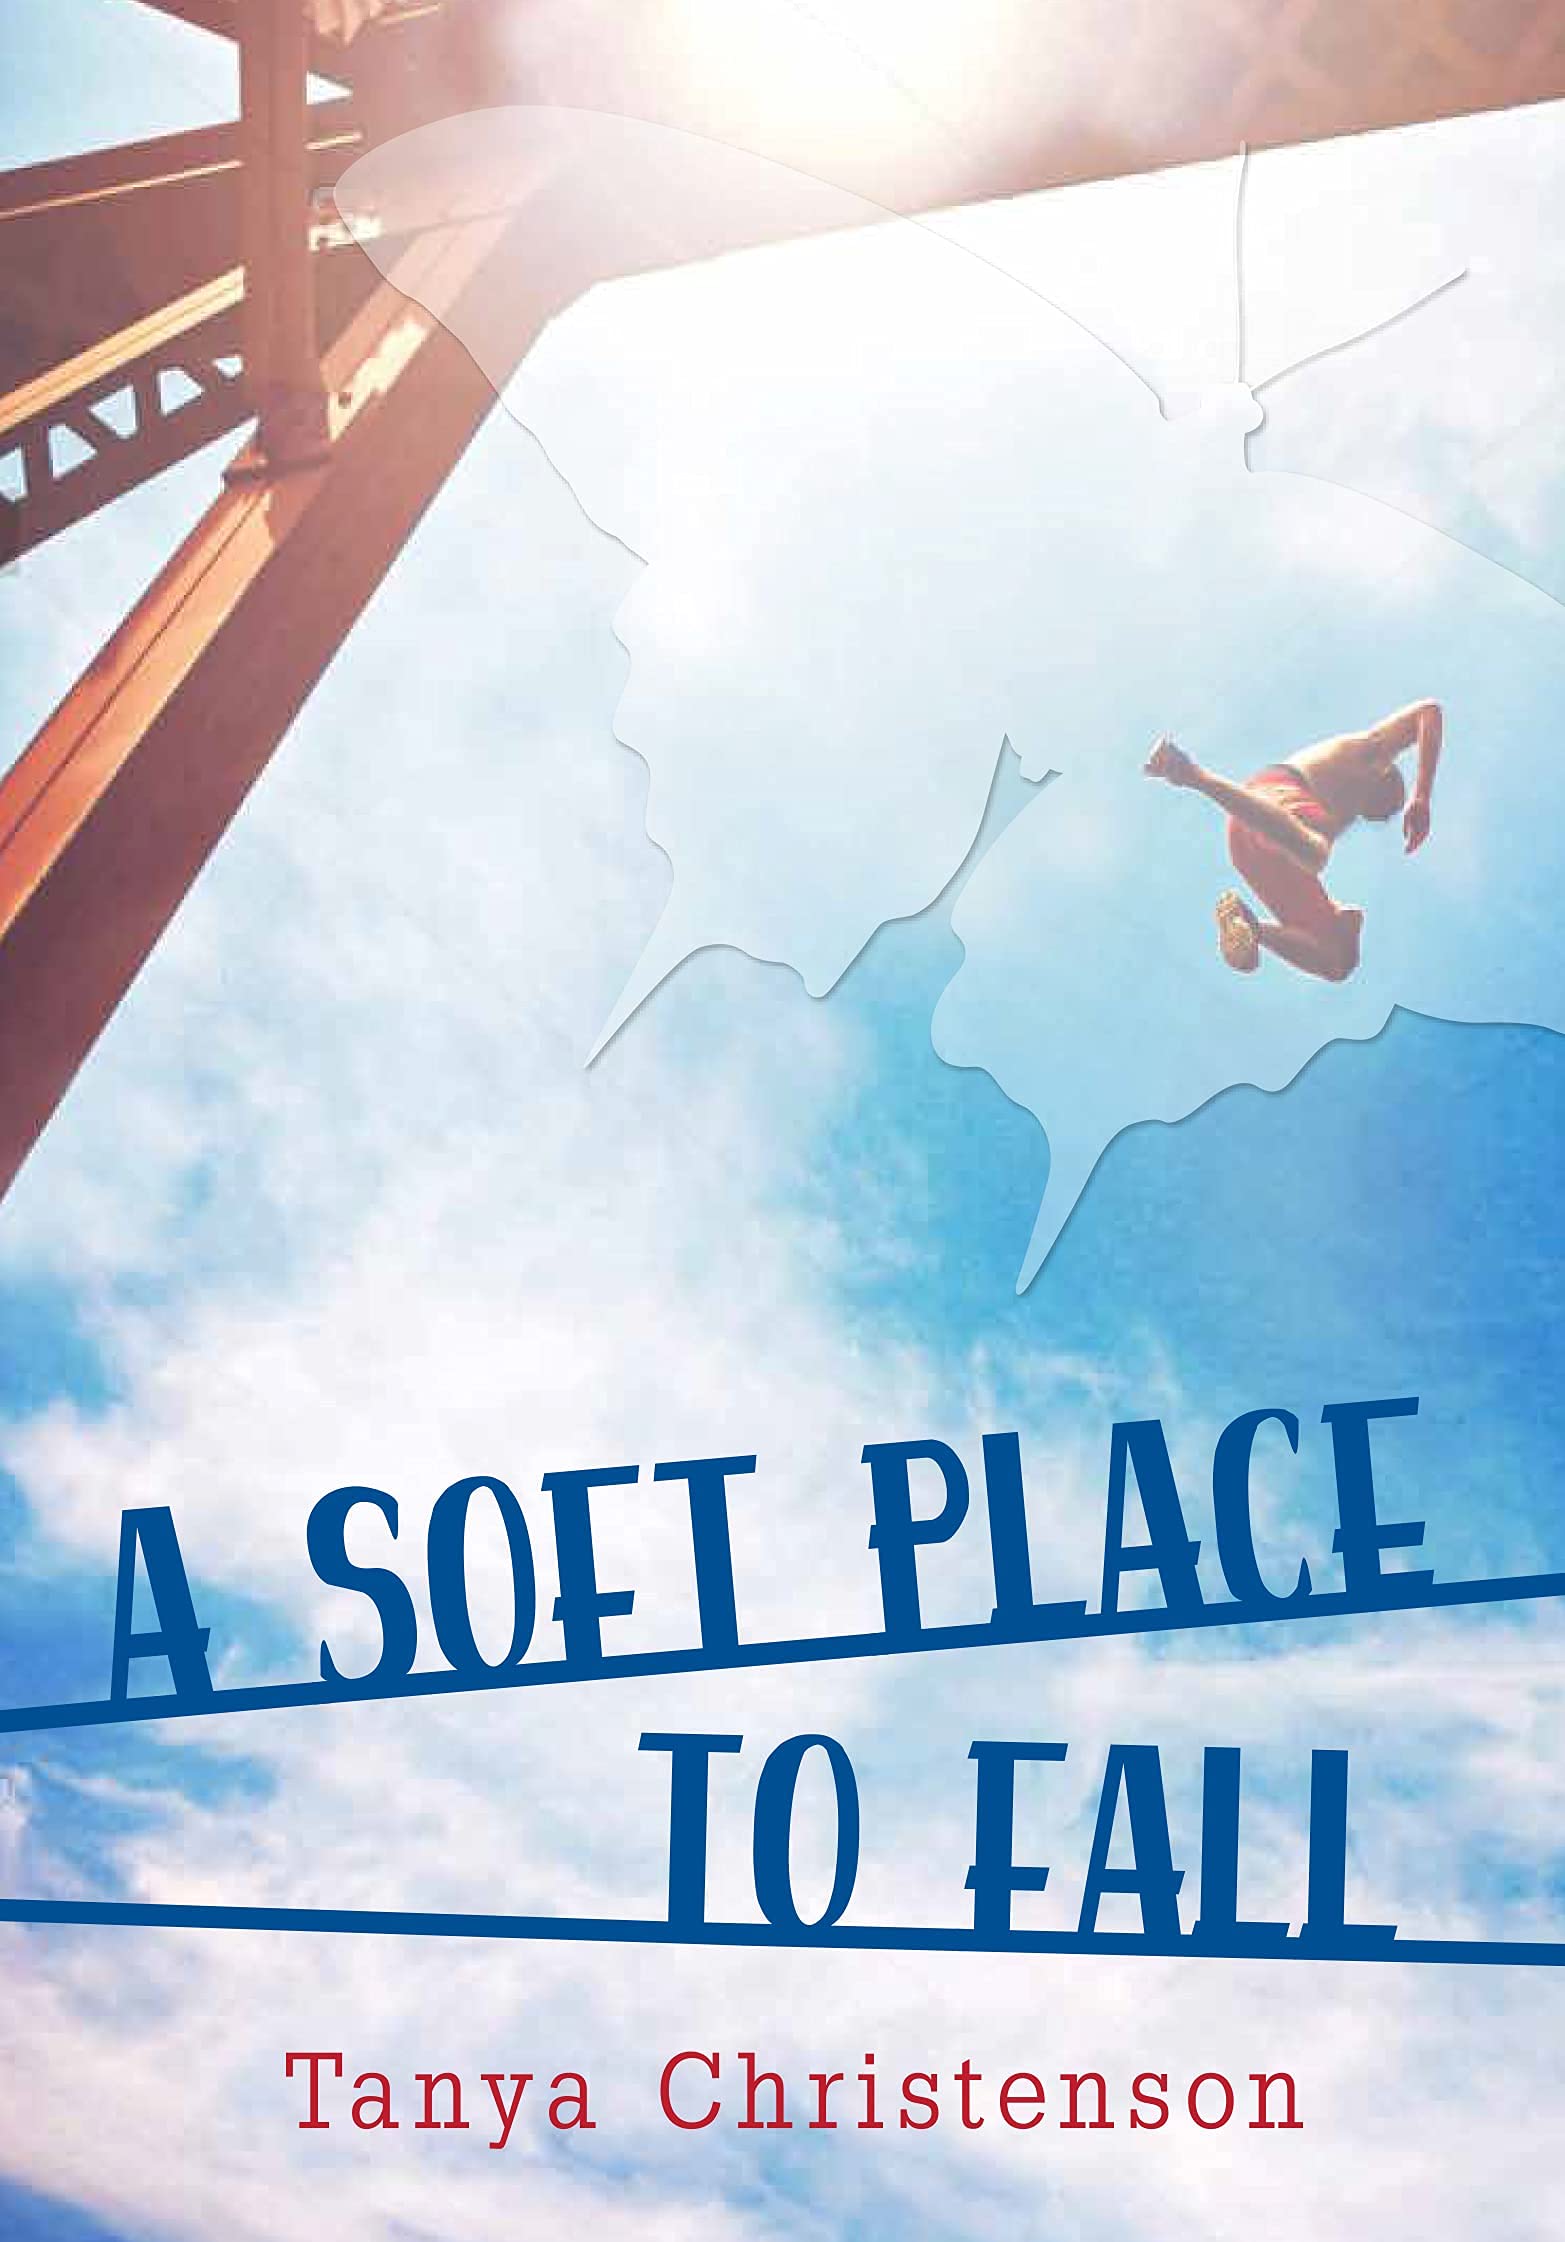 A Soft Place to Fall